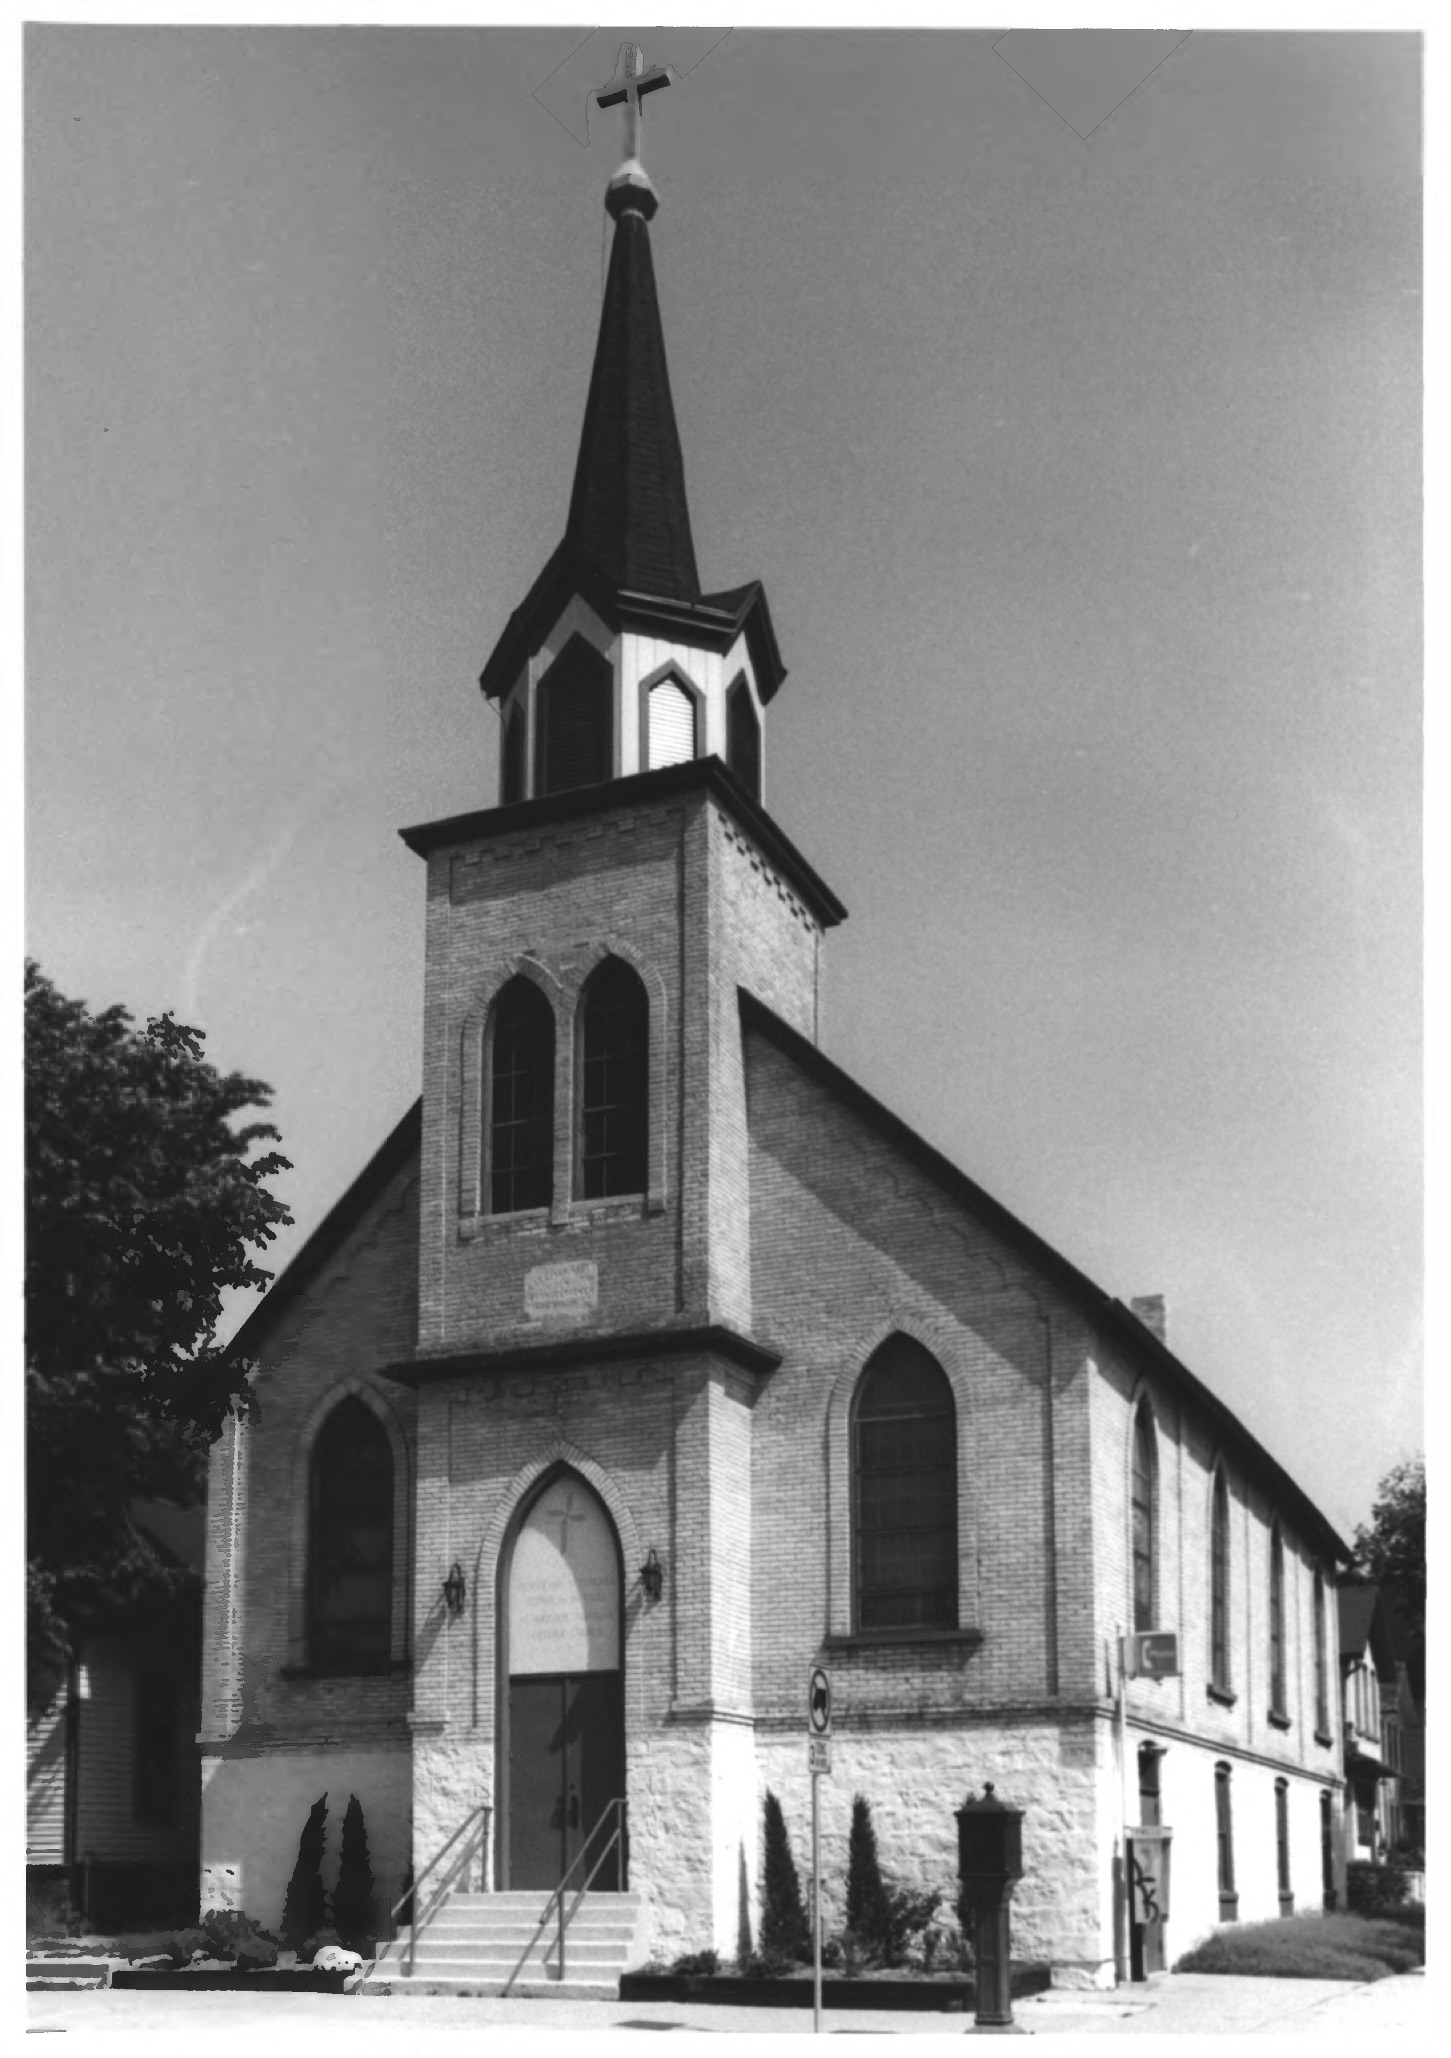 Built in 1874, St. Michael's was originally known as the Salem Evangelical Church (Lutheran). It became home to St. Michael's, Wisconsin's only Ukrainian Catholic Church, in 1953. It was added to the National Register of Historic Places in 1987. 